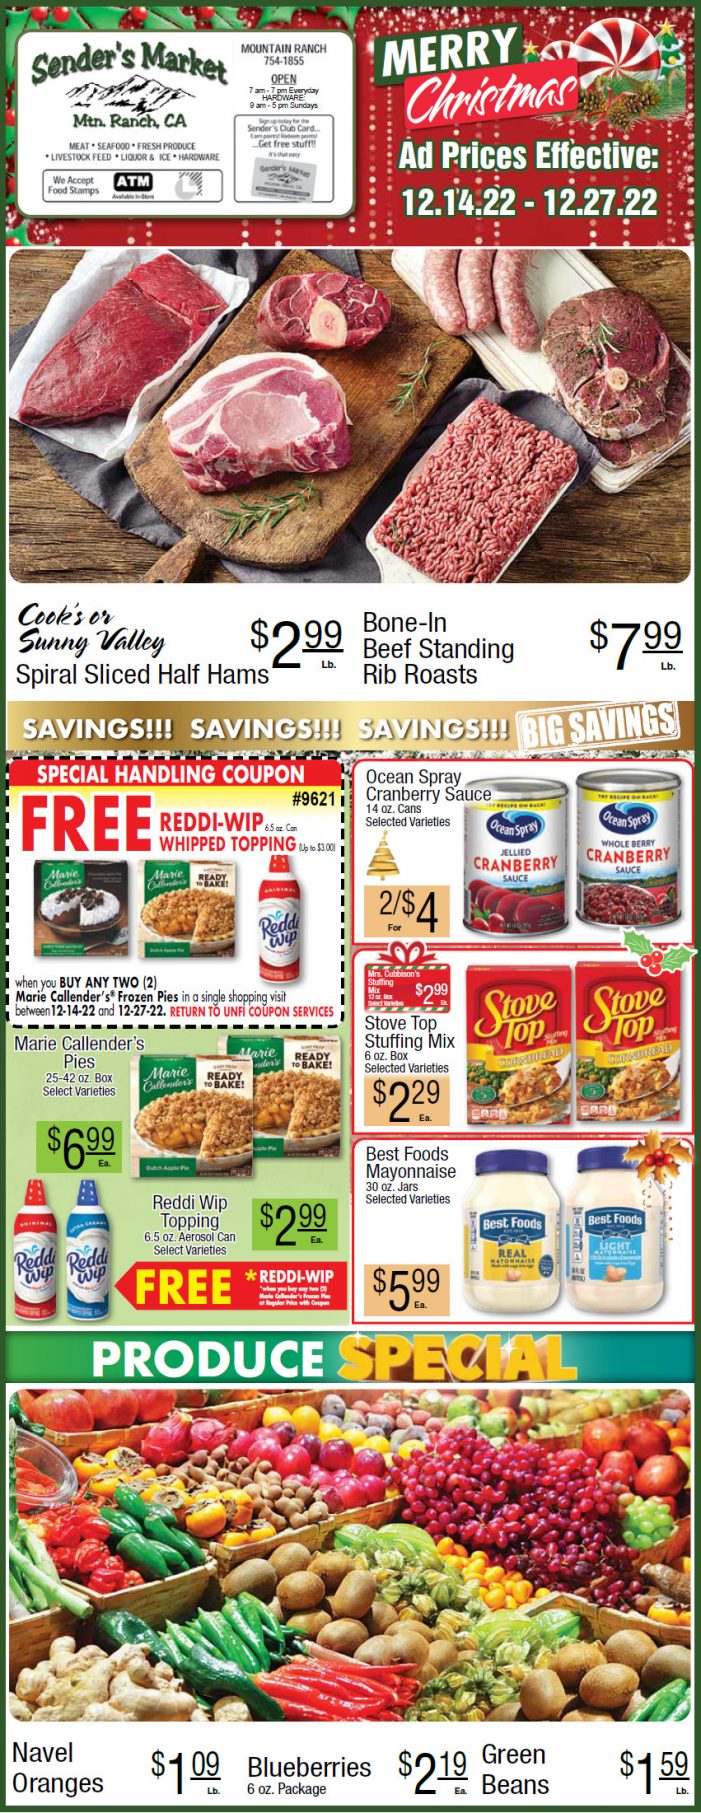 Sender’s Market Christmas Ad & Grocery Specials December 14 – 27th! Shop Local & Save!